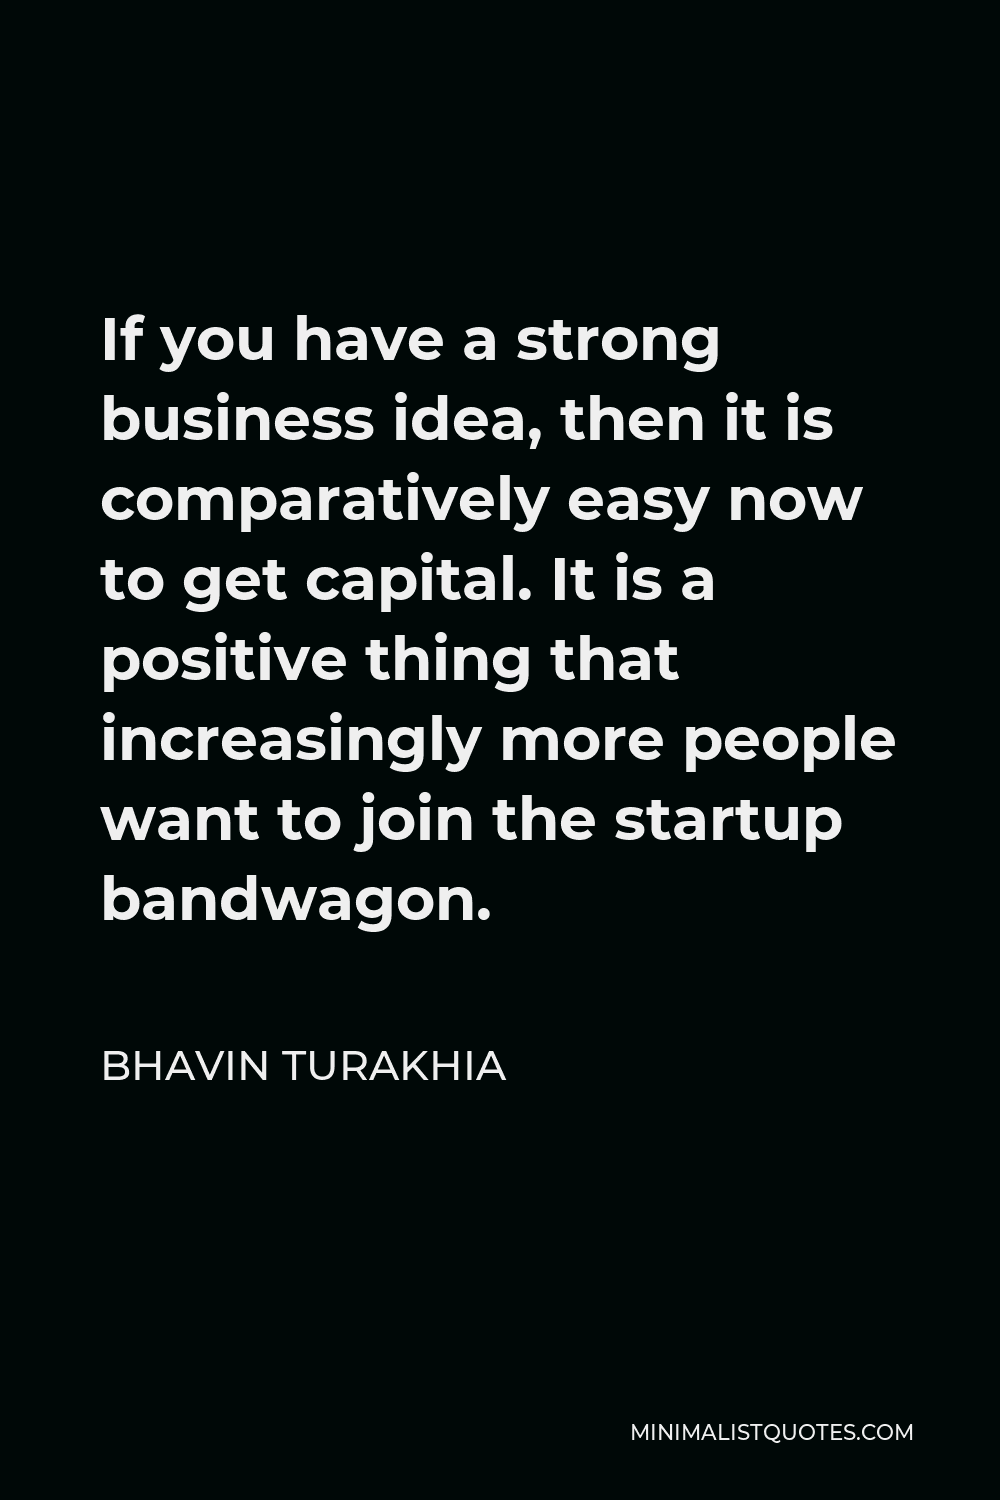 Bhavin Turakhia Quote - If you have a strong business idea, then it is comparatively easy now to get capital. It is a positive thing that increasingly more people want to join the startup bandwagon.